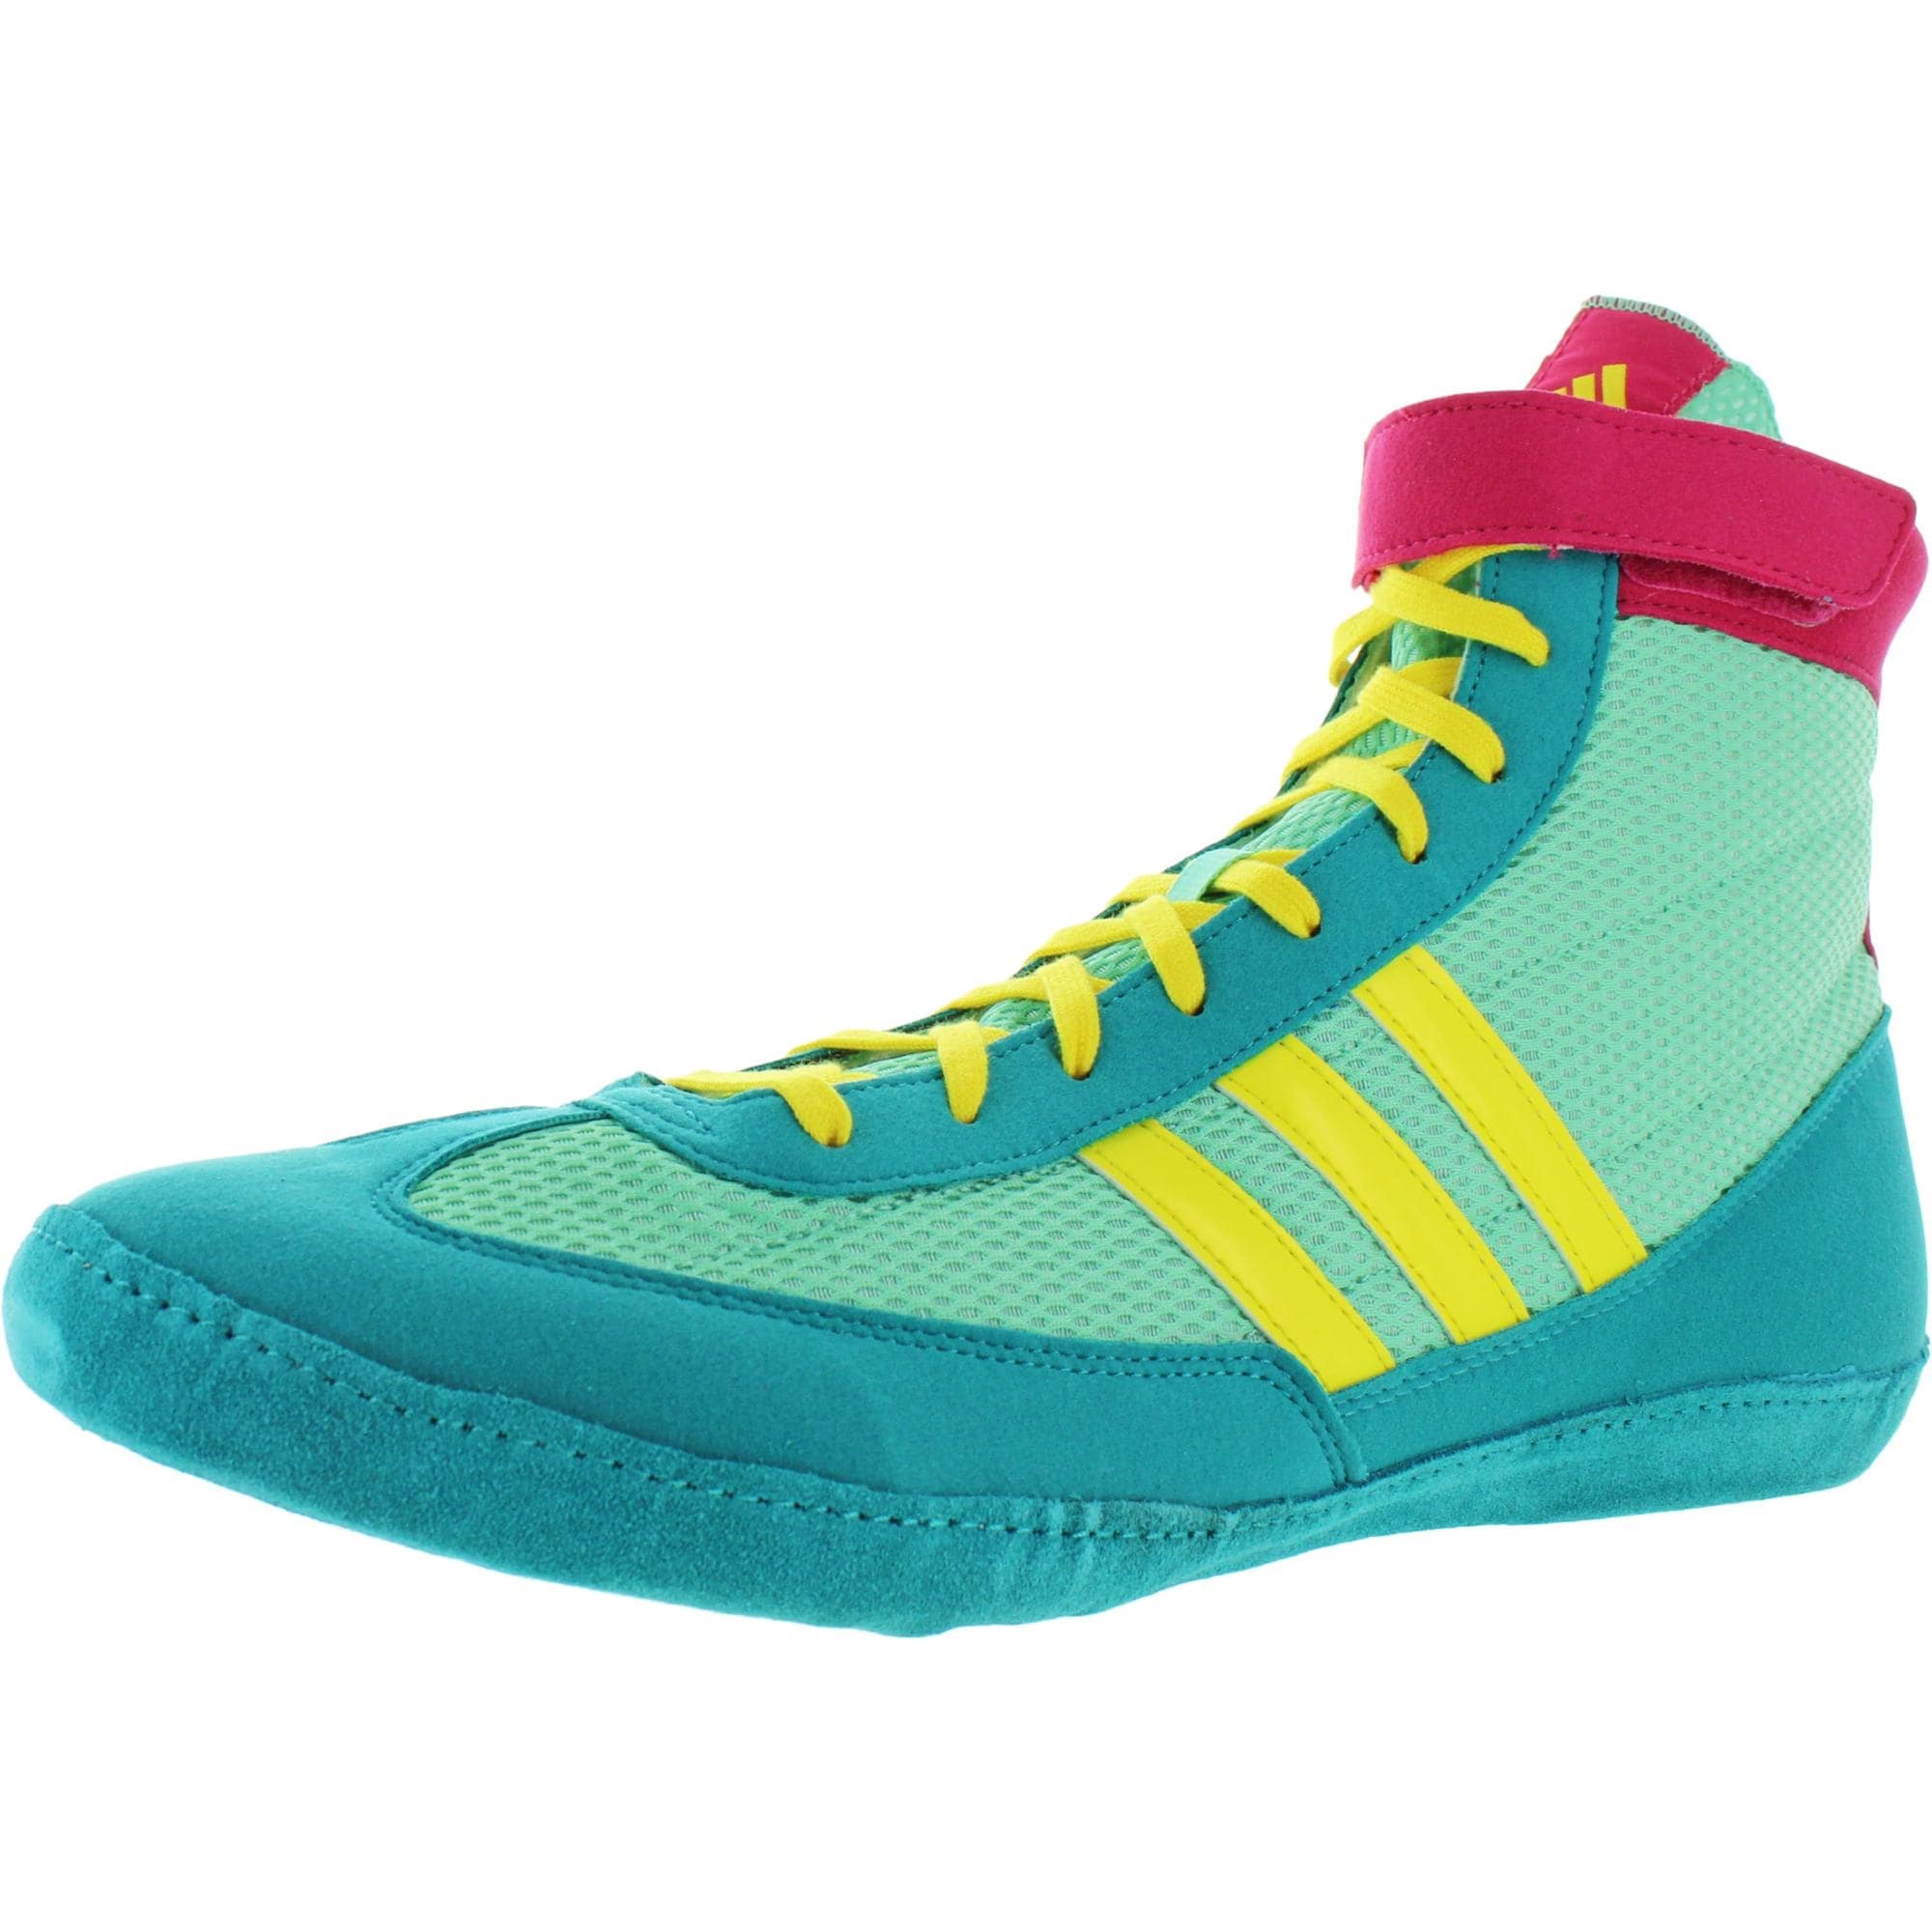 pink and blue wrestling shoes